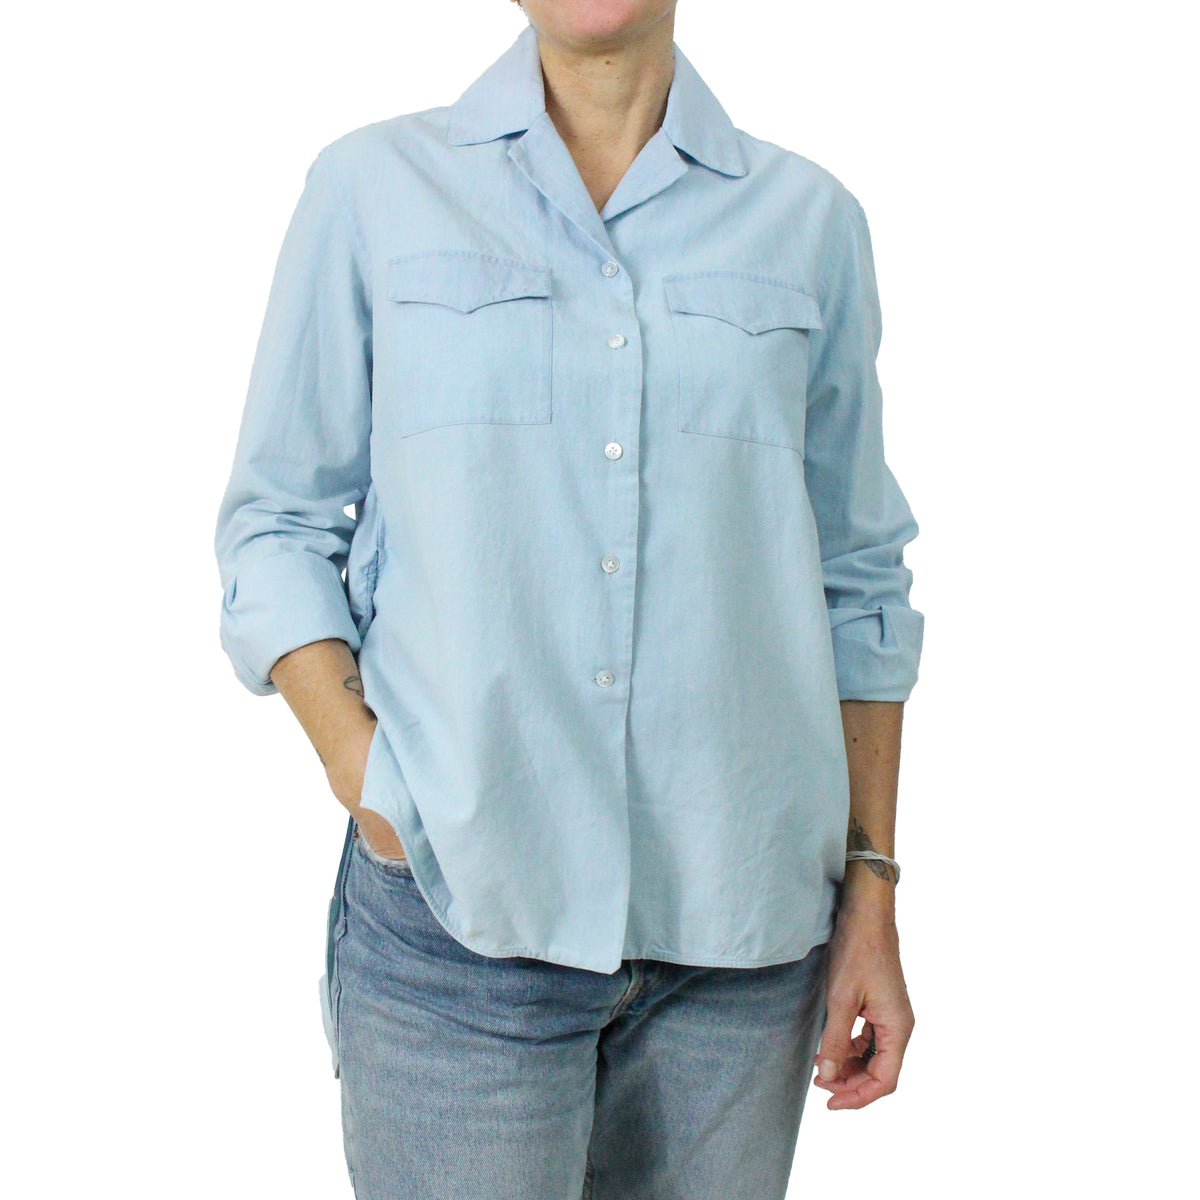 Women's Over fit shirt with front pockets cotton denim